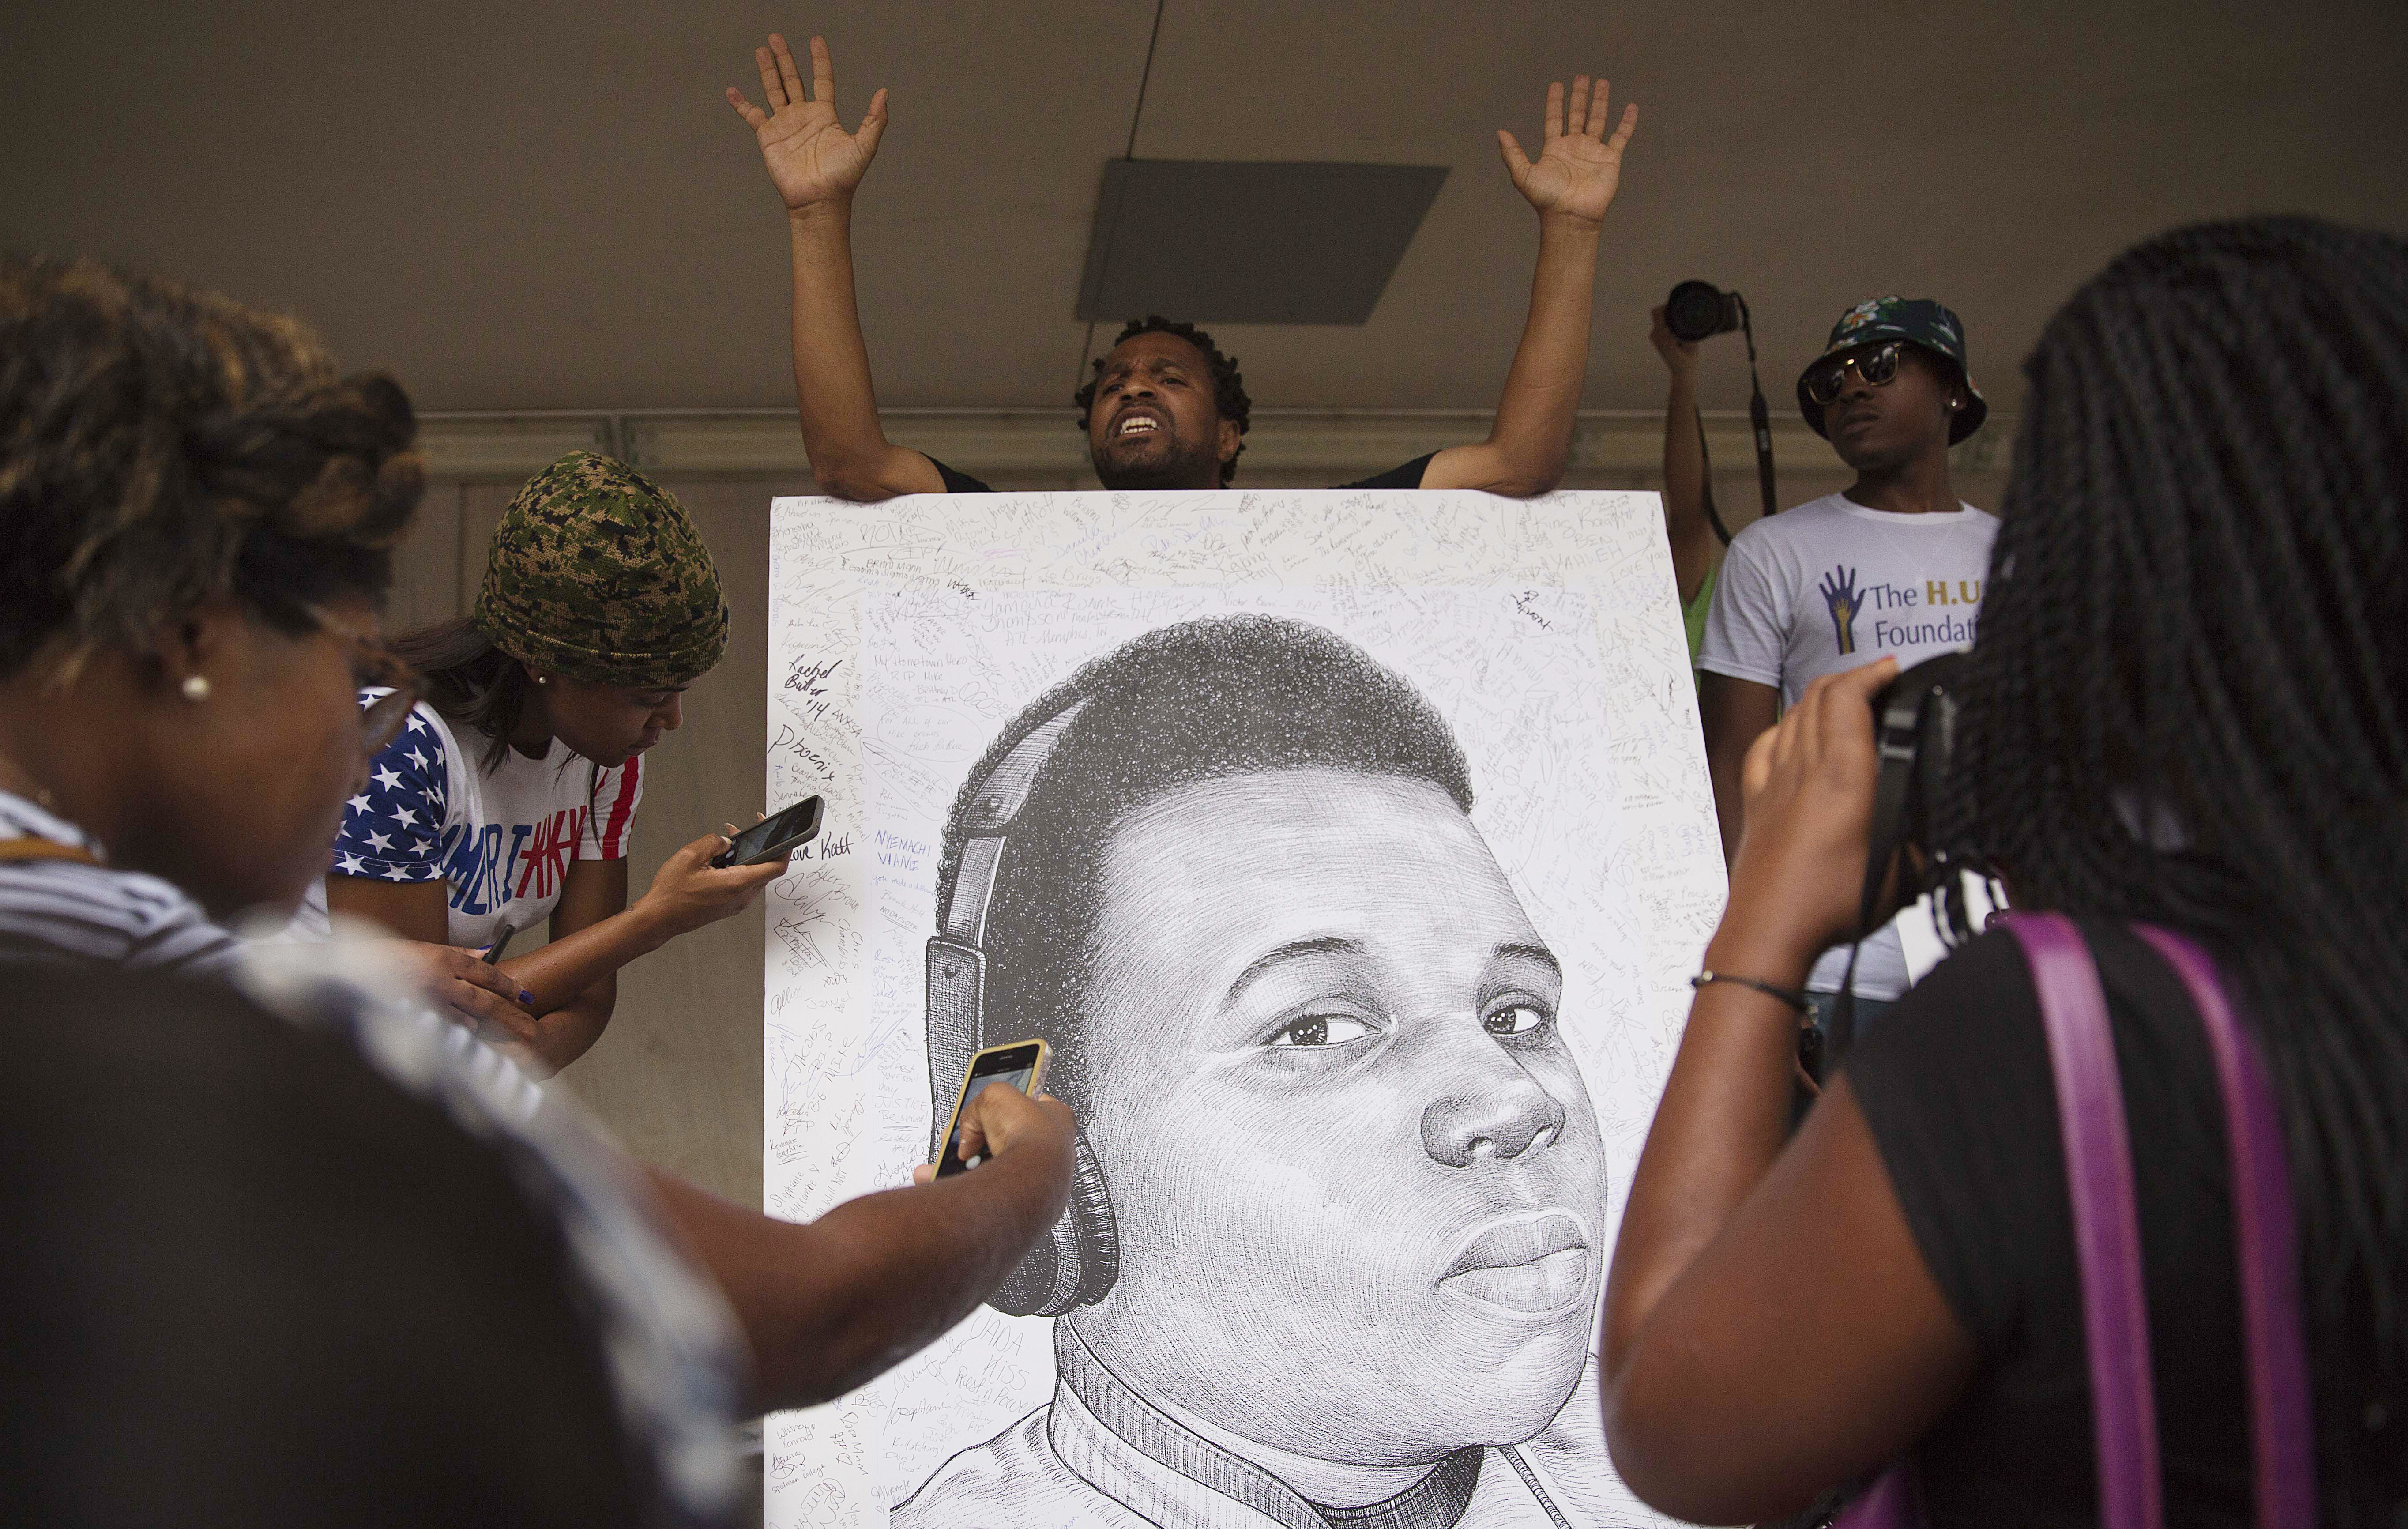 Demonstrators autograph a drawing of Michael Brown during a protest against the fatal police shooting, in Atlanta on Aug. 18, 2014.